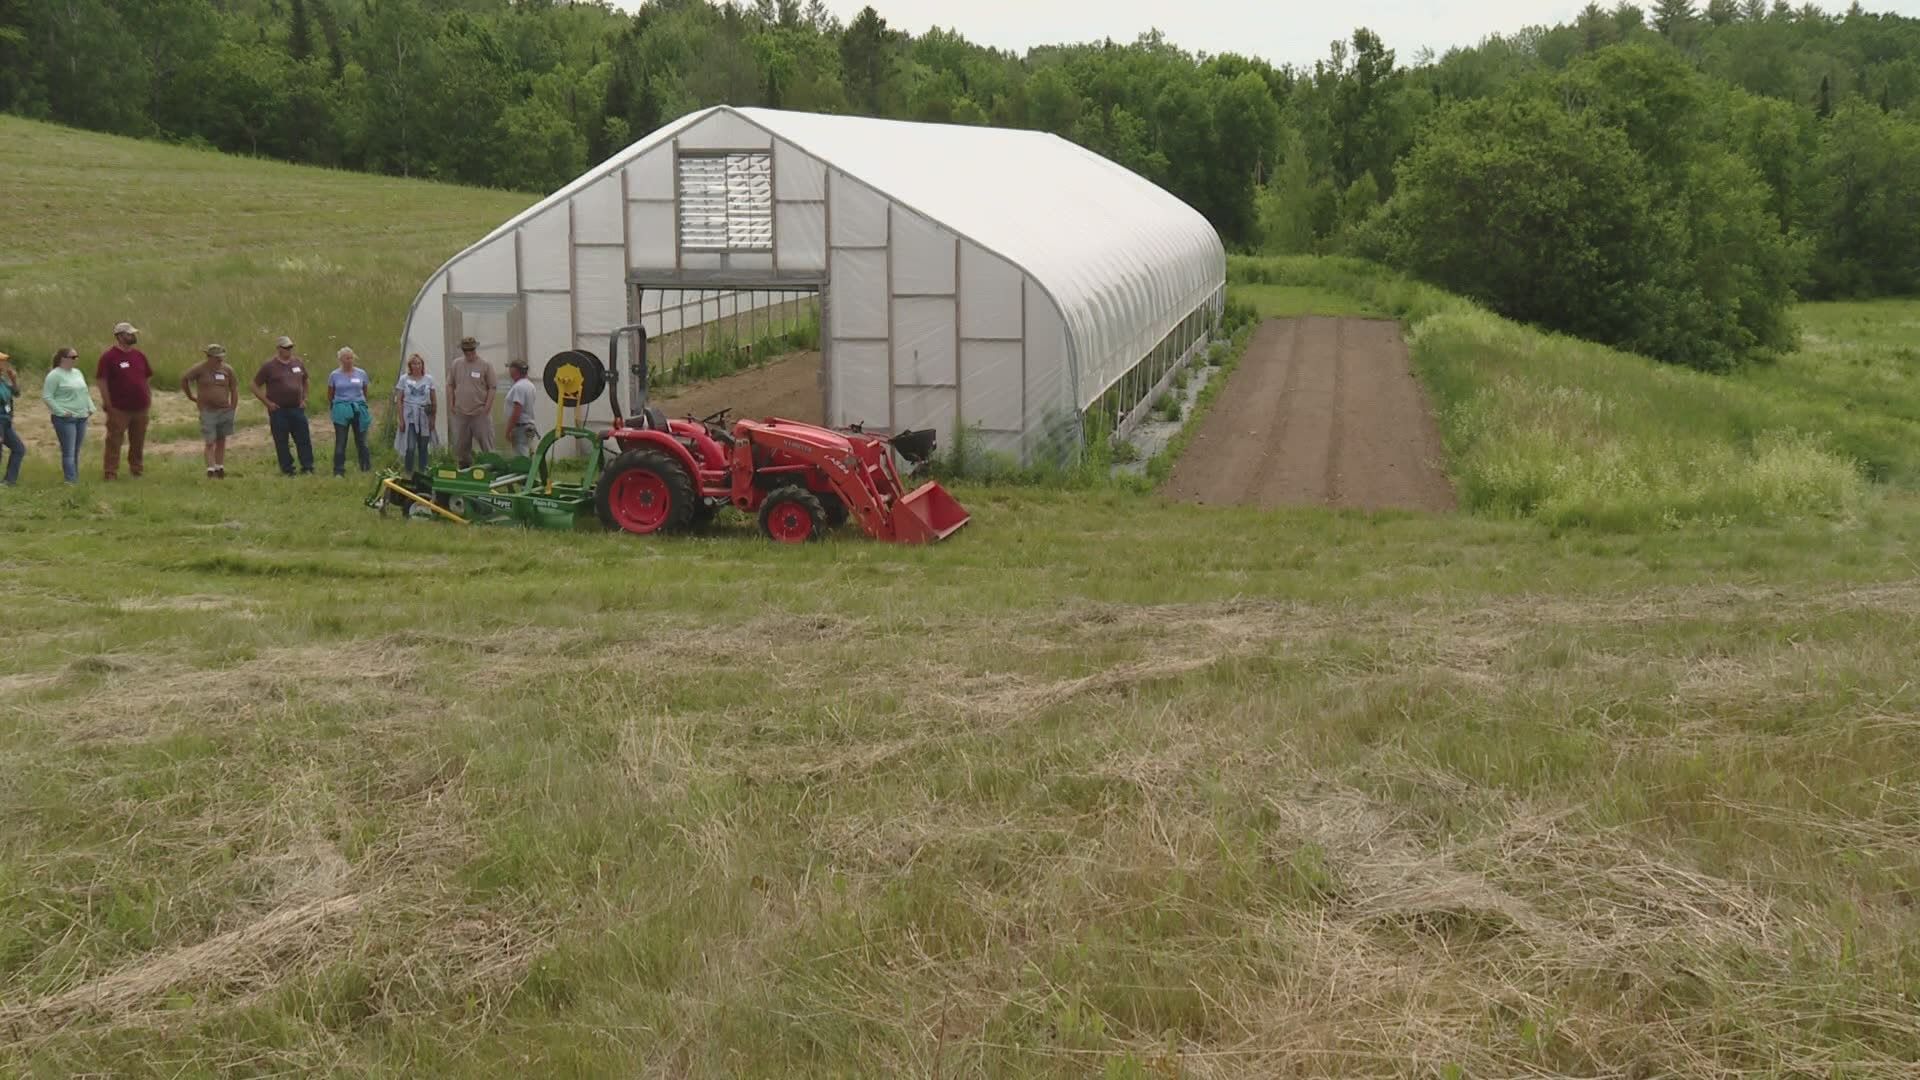 Veteran farmers Anne and Tim Devin help other vets cultivate the skills to farm